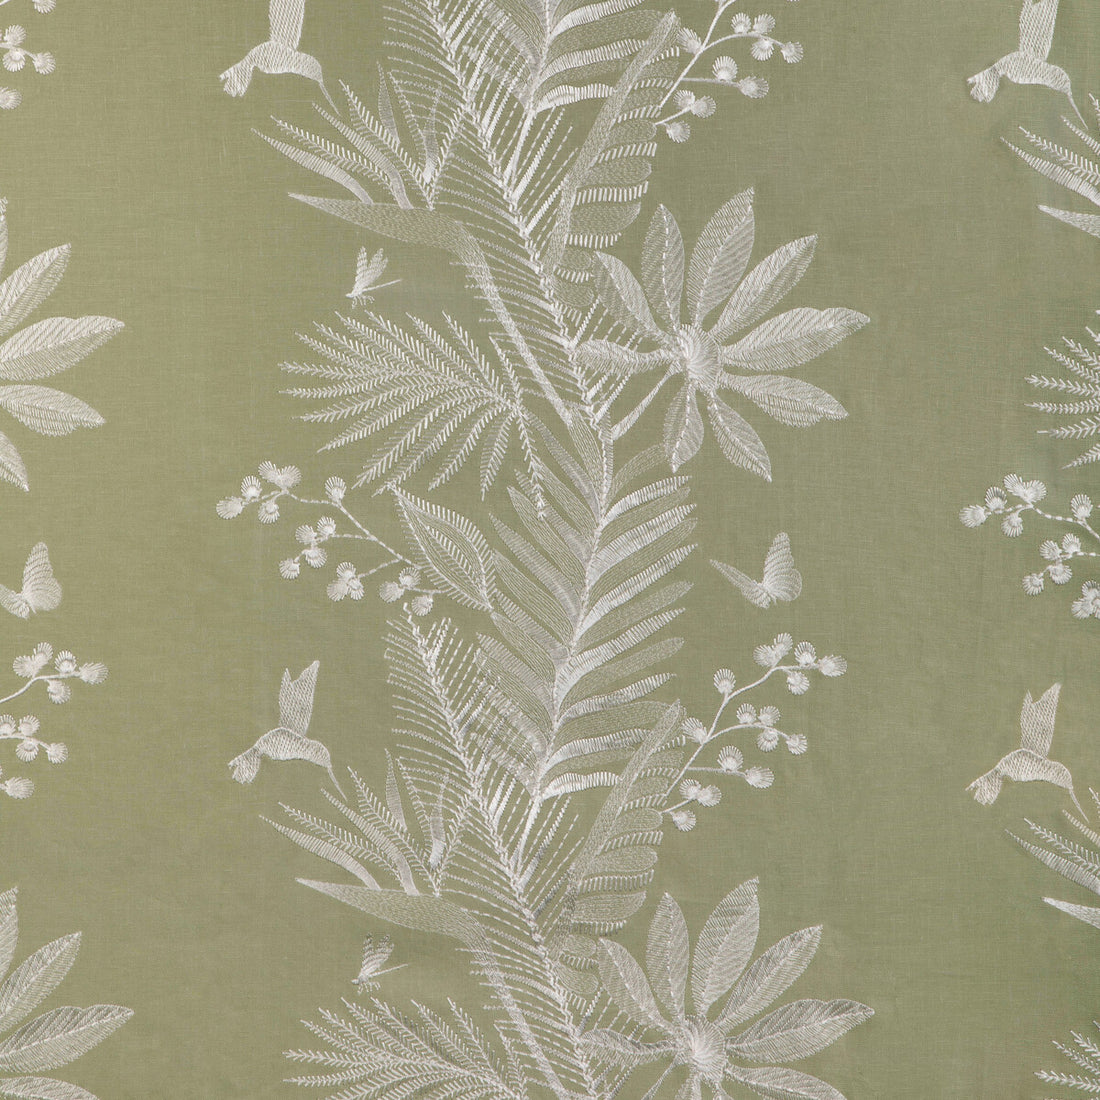 Manda Emb fabric in leaf color - pattern 8023114.31.0 - by Brunschwig &amp; Fils in the Anduze Embroideries collection